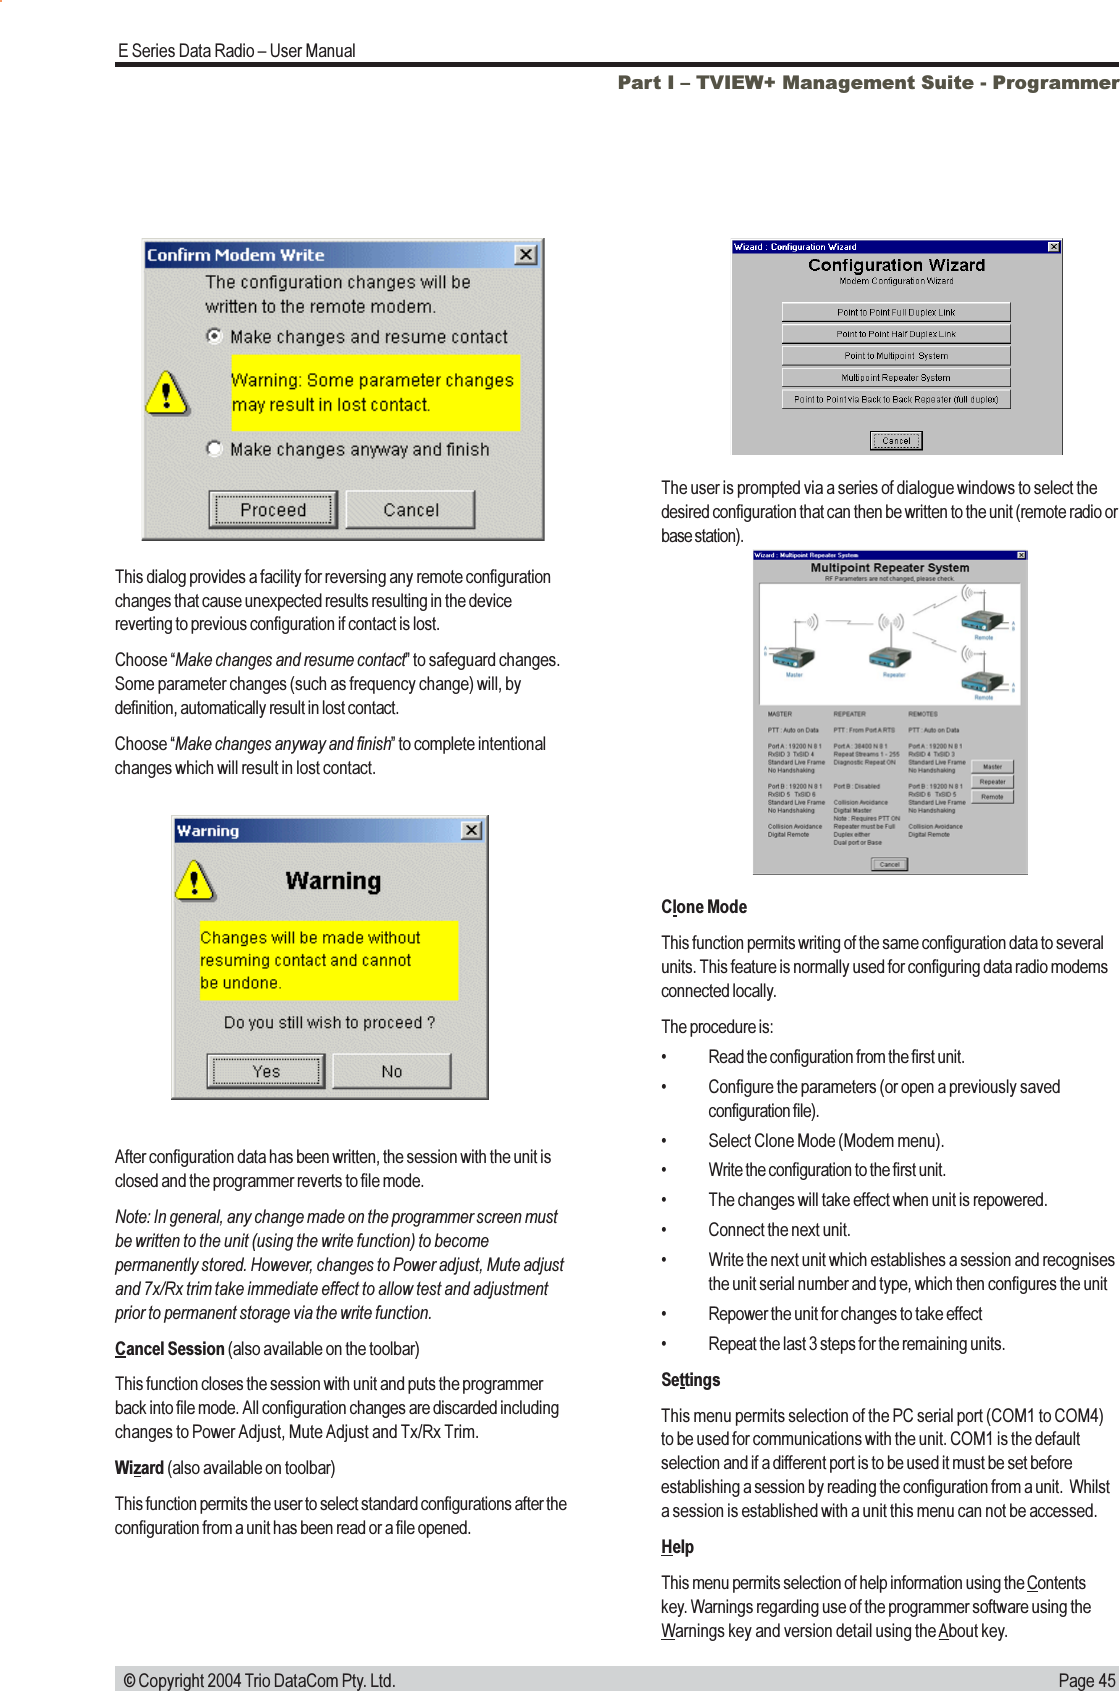 Page 45E Series Data Radio  User Manual © Copyright 2004 Trio DataCom Pty. Ltd.This dialog provides a facility for reversing any remote configurationchanges that cause unexpected results resulting in the devicereverting to previous configuration if contact is lost.Choose Make changes and resume contact to safeguard changes.Some parameter changes (such as frequency change) will, bydefinition, automatically result in lost contact.Choose Make changes anyway and finish to complete intentionalchanges which will result in lost contact.Part I  TVIEW+ Management Suite - ProgrammerAfter configuration data has been written, the session with the unit isclosed and the programmer reverts to file mode.Note: In general, any change made on the programmer screen mustbe written to the unit (using the write function) to becomepermanently stored. However, changes to Power adjust, Mute adjustand 7x/Rx trim take immediate effect to allow test and adjustmentprior to permanent storage via the write function.Cancel Session (also available on the toolbar)This function closes the session with unit and puts the programmerback into file mode. All configuration changes are discarded includingchanges to Power Adjust, Mute Adjust and Tx/Rx Trim.Wizard (also available on toolbar)This function permits the user to select standard configurations after theconfiguration from a unit has been read or a file opened.The user is prompted via a series of dialogue windows to select thedesired configuration that can then be written to the unit (remote radio orbase station).Clone ModeThis function permits writing of the same configuration data to severalunits. This feature is normally used for configuring data radio modemsconnected locally.The procedure is: Read the configuration from the first unit. Configure the parameters (or open a previously savedconfiguration file). Select Clone Mode (Modem menu). Write the configuration to the first unit. The changes will take effect when unit is repowered. Connect the next unit. Write the next unit which establishes a session and recognisesthe unit serial number and type, which then configures the unit Repower the unit for changes to take effect Repeat the last 3 steps for the remaining units.SettingsThis menu permits selection of the PC serial port (COM1 to COM4)to be used for communications with the unit. COM1 is the defaultselection and if a different port is to be used it must be set beforeestablishing a session by reading the configuration from a unit.  Whilsta session is established with a unit this menu can not be accessed.HelpThis menu permits selection of help information using the Contentskey. Warnings regarding use of the programmer software using theWarnings key and version detail using the About key.